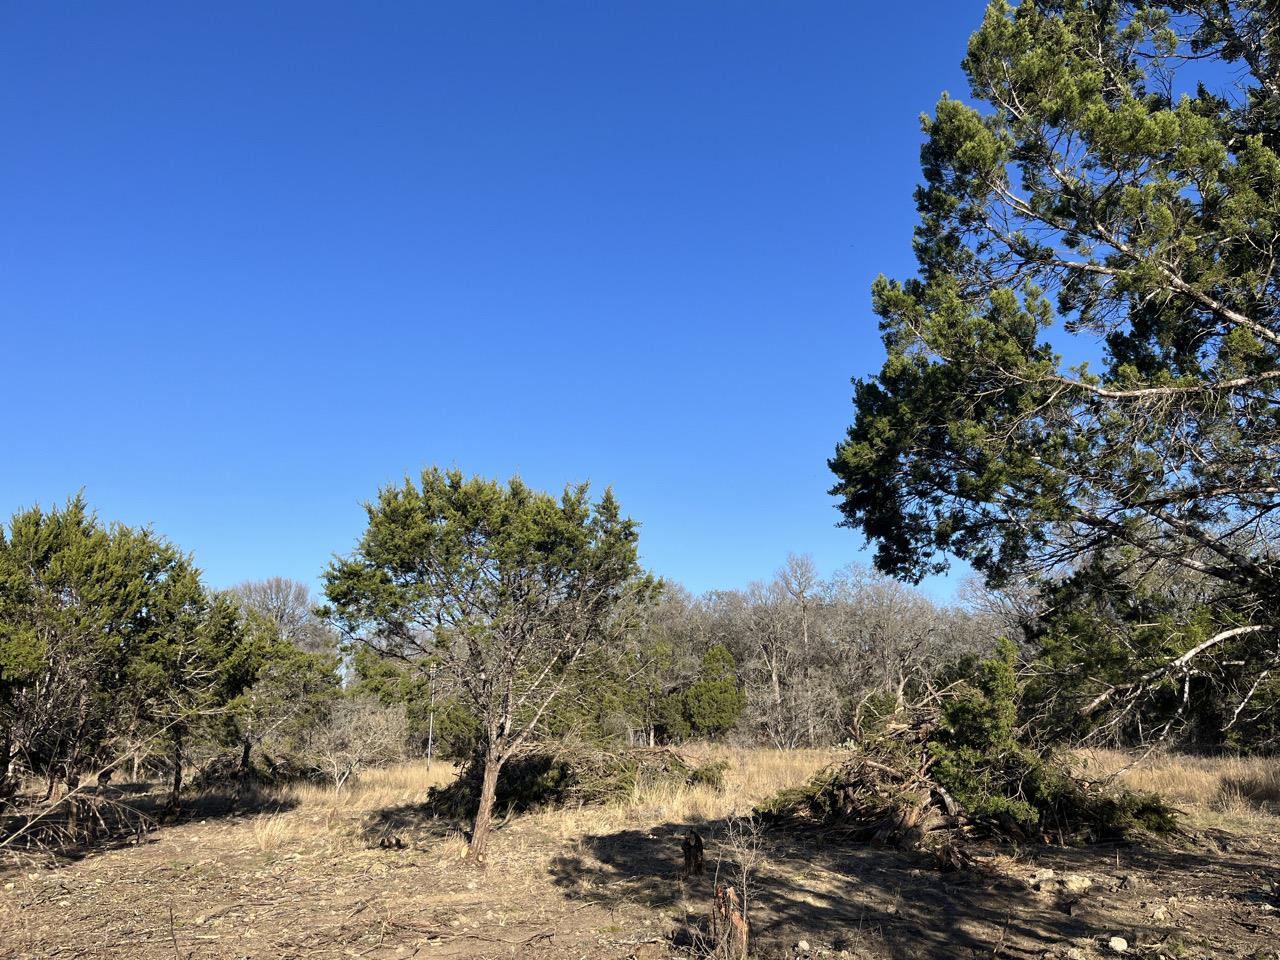 Completed hand-cut shaded fuel break to reduce wildfire risk on a site with dense juniper/mesquite overstory in Bexar County, Texas..